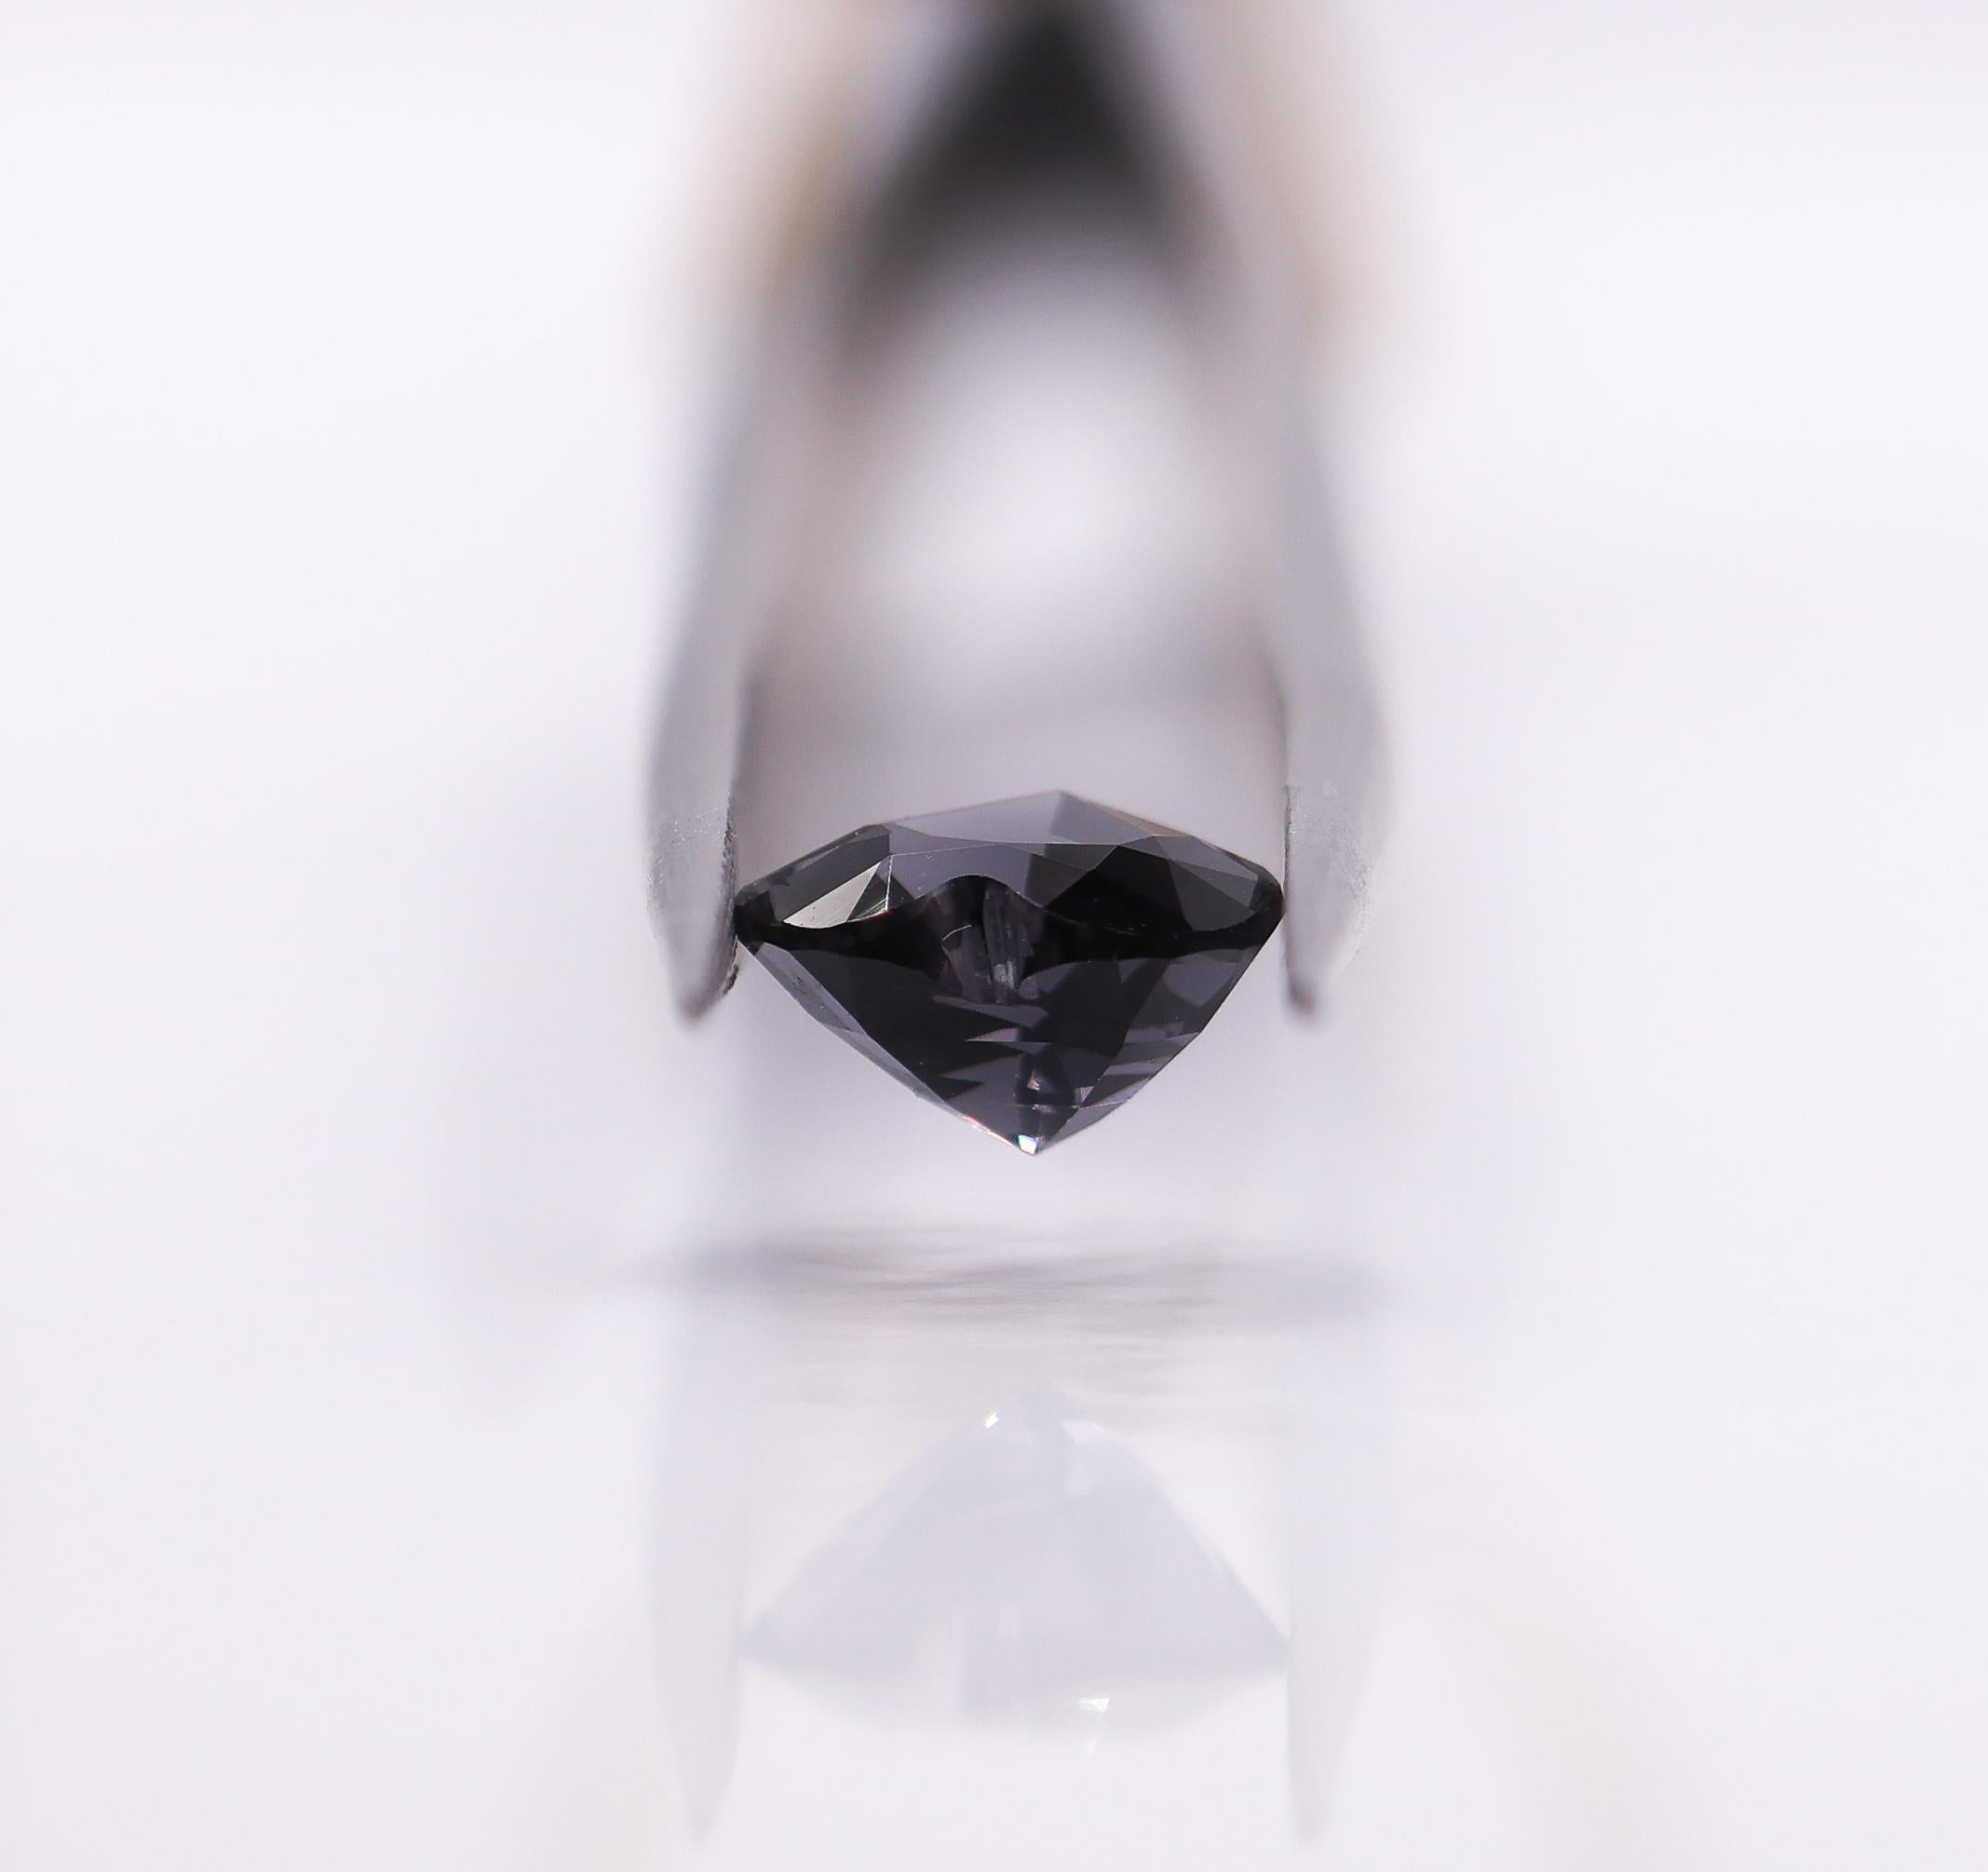 Presenting a 1.59 carat Grey Spinel gemstone! This gemstone's brilliance and clarity makes it a versatile choice for various jewelry designs, offering a modern and elegant twist to traditional gemstone options. 

Specifications

Stone: Grey